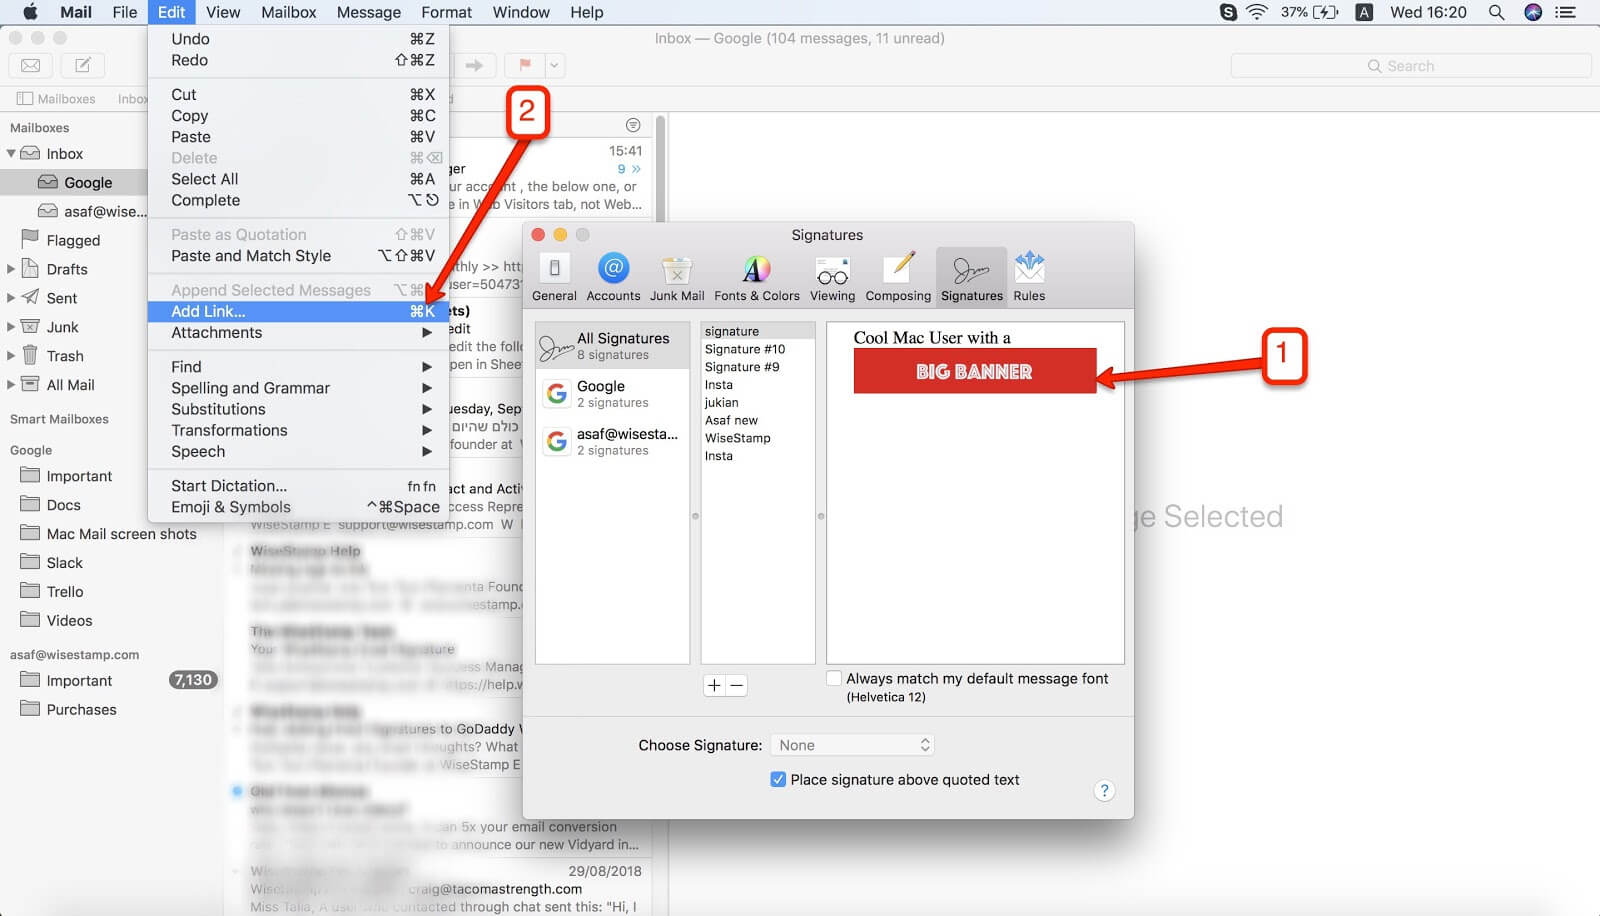 Add a hyperlink image to Mac Mail signature